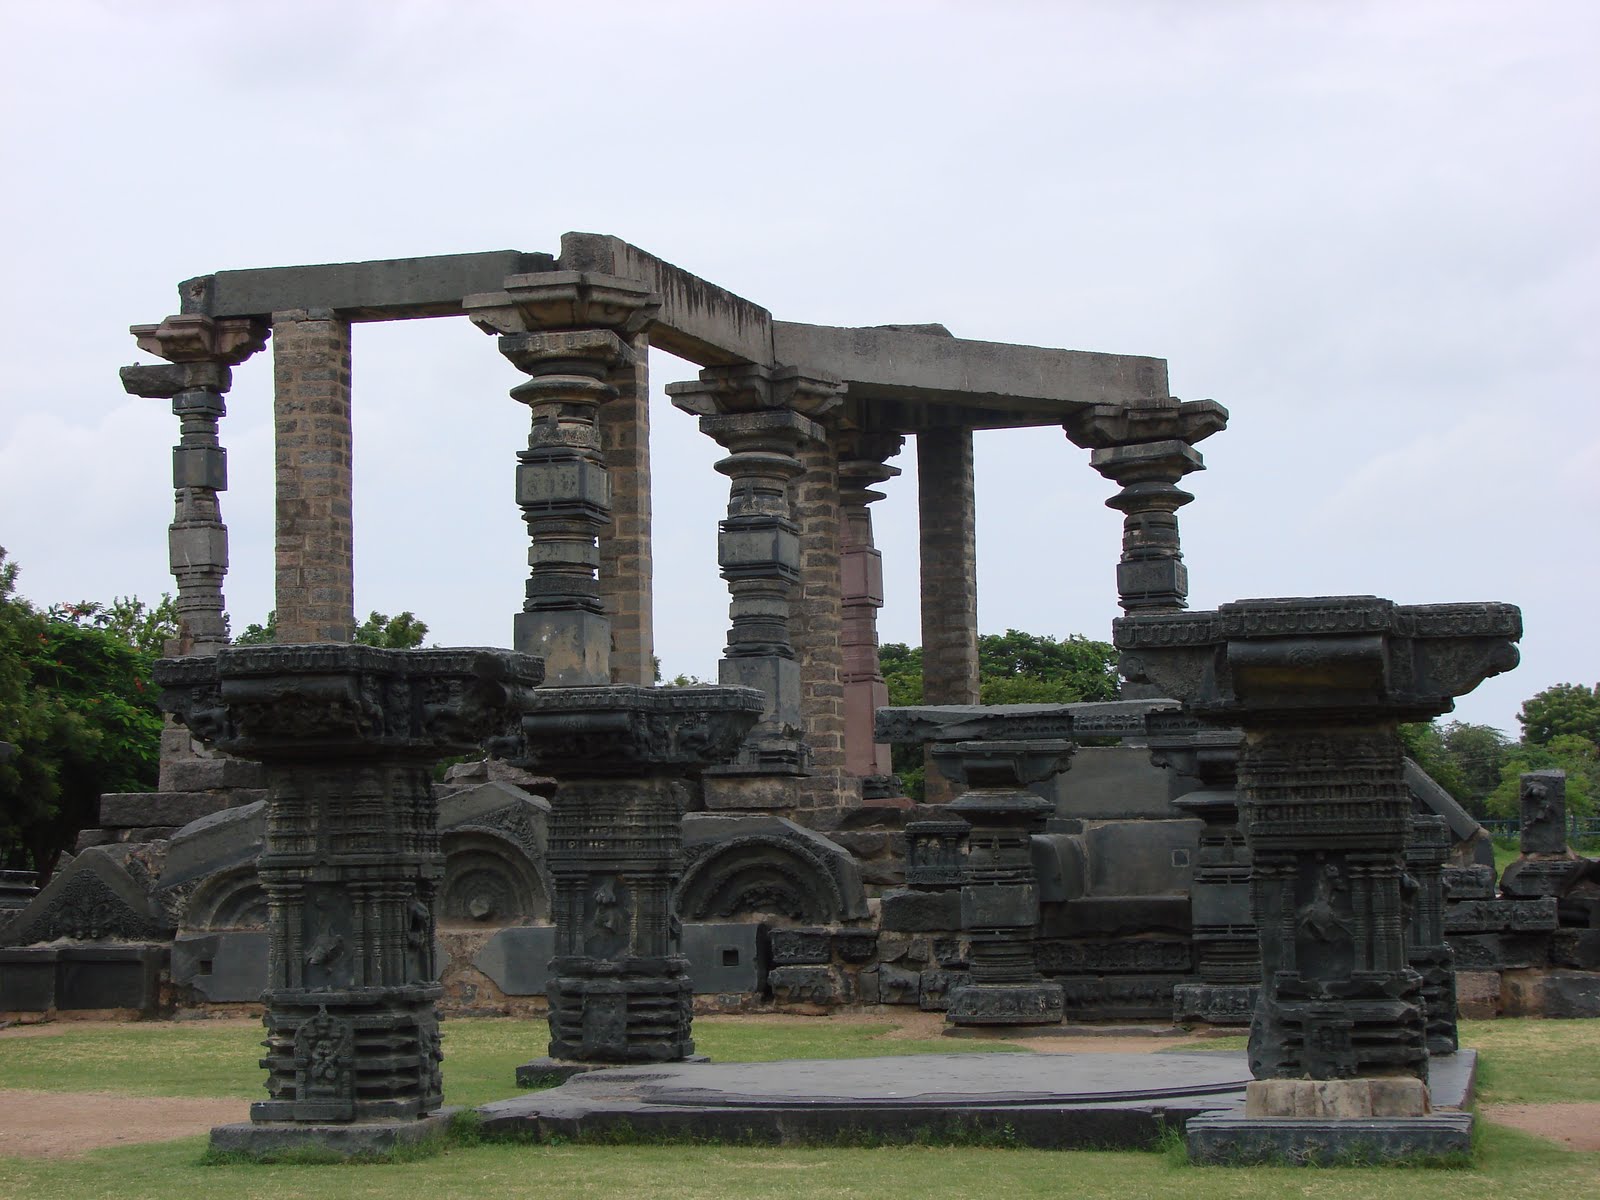 Warangal Fort-Warangal Fort belongs to the 13th century when it was constructed by King Ganapati Deva. The fort was intended to be his second capital. The exquisite carved pillars and arches add attraction to the fort. The fort houses a temple, which is dedicated to Swayambhudevi, Mother Earth.